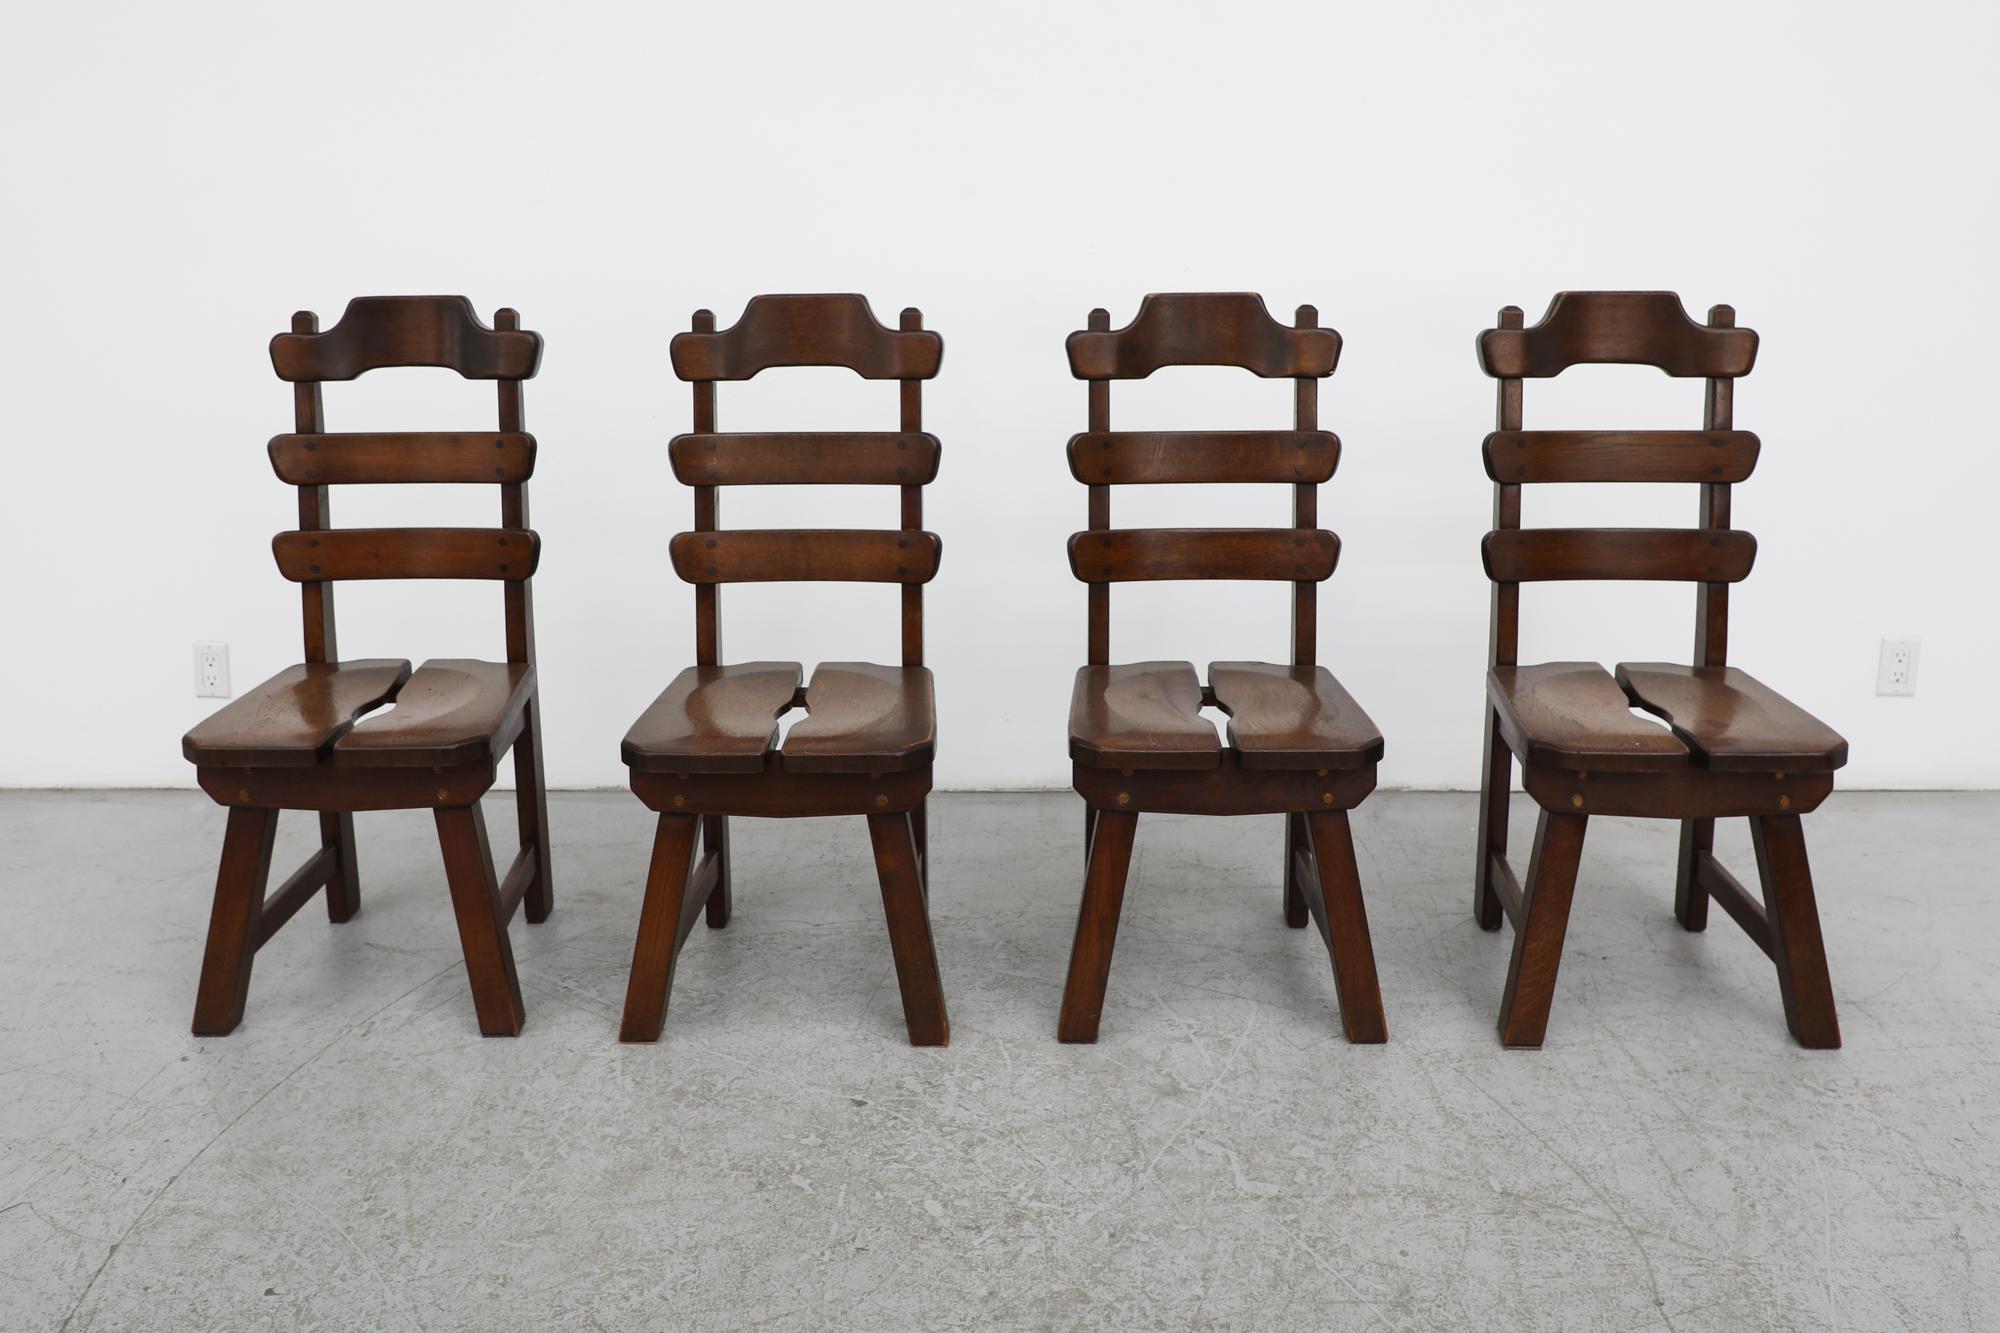 1960's, Belgian set of 4 Brutalist ladder back side or dining chairs. Handsomely made from dark stained solid oak. These chairs have a classic Brutalist design with split seats and wonderful carved details on the backrests and seats. Lightly